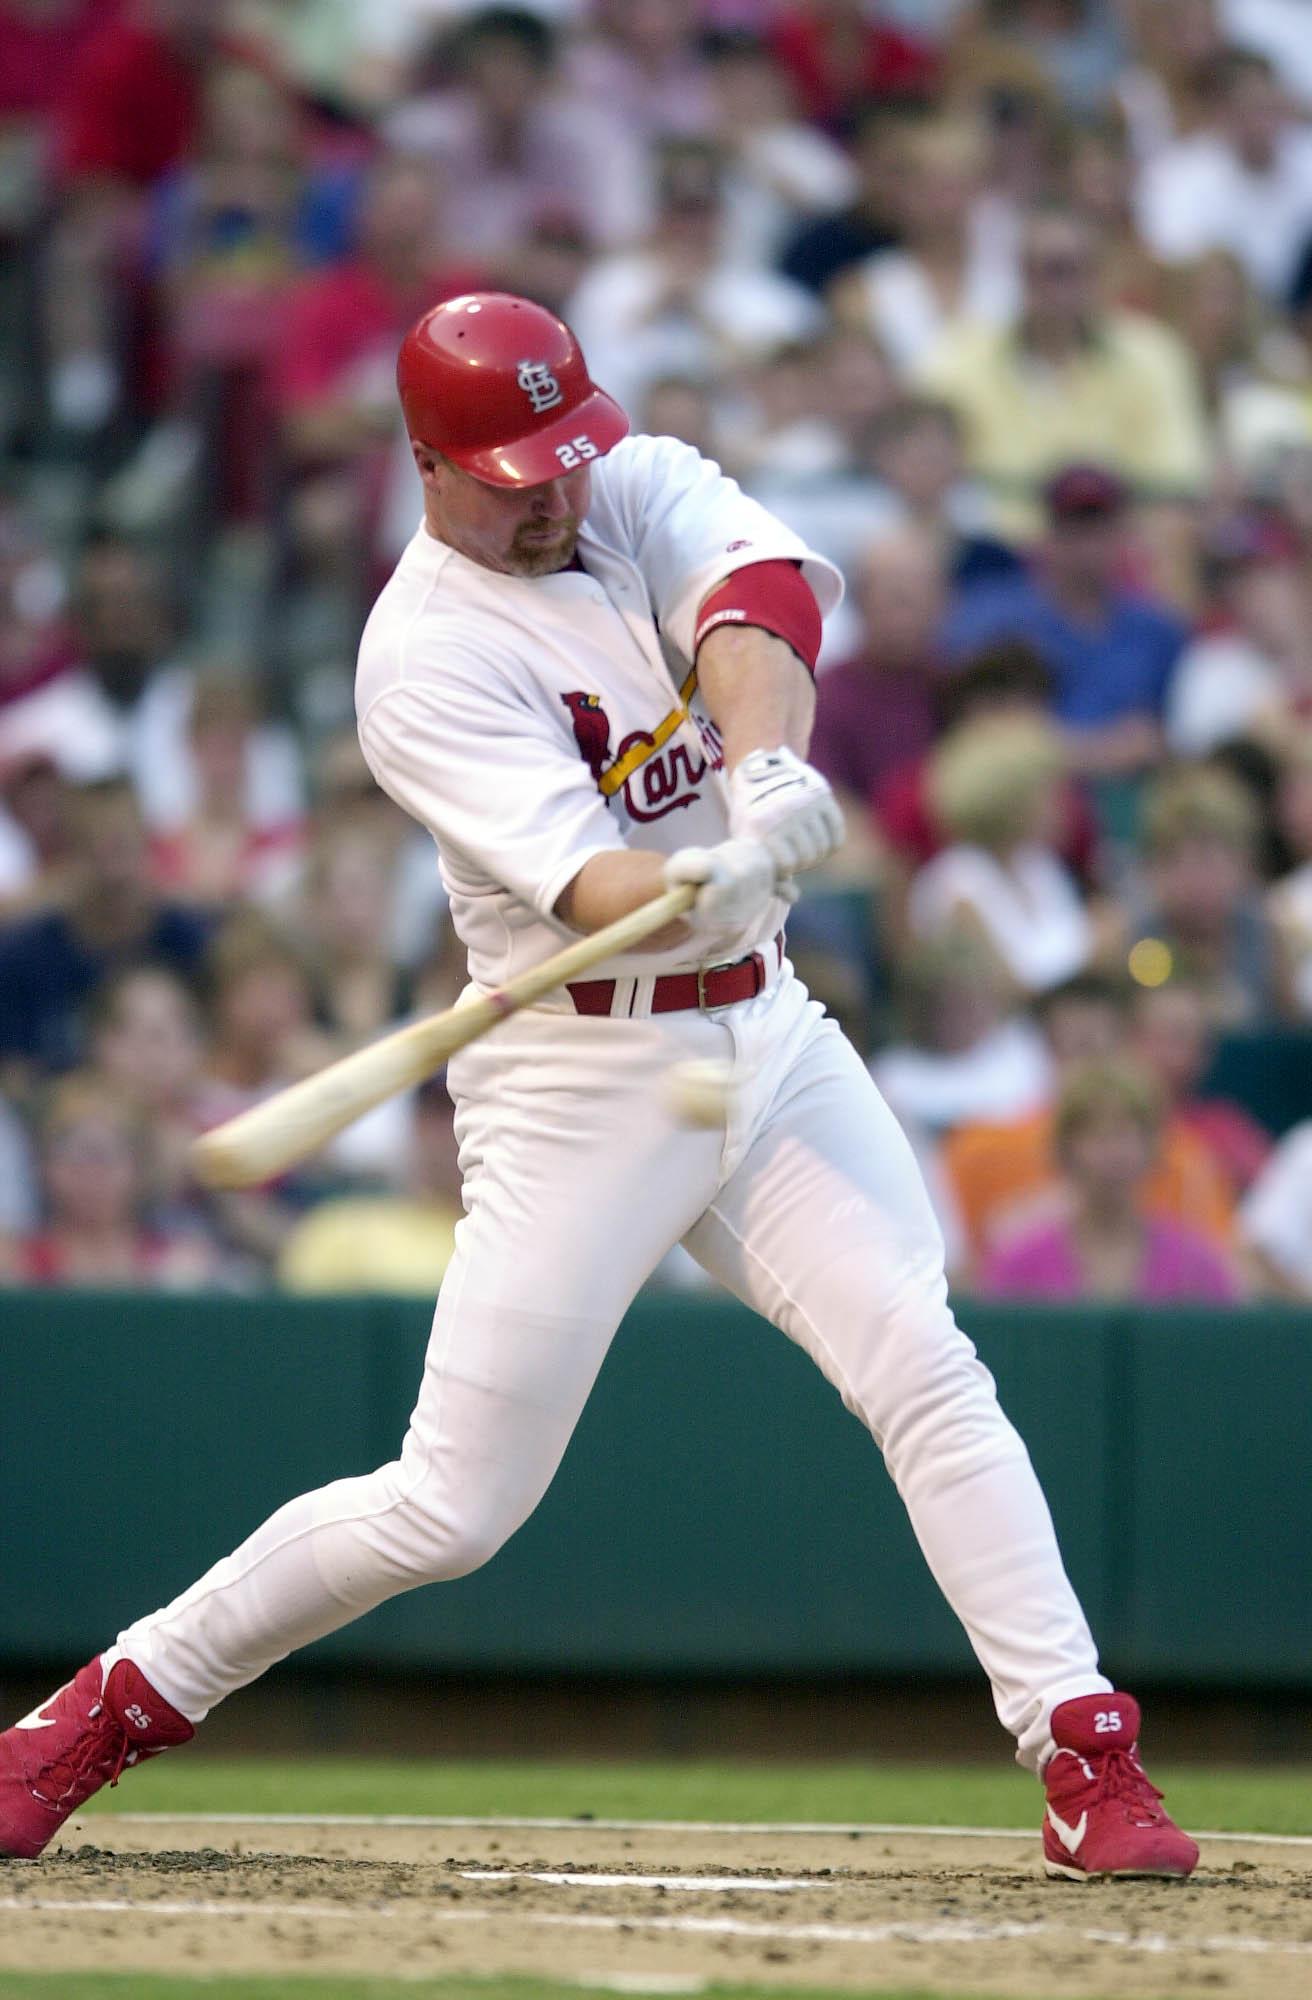 Mark McGwire's brother, Jay, says he introduced the slugger to